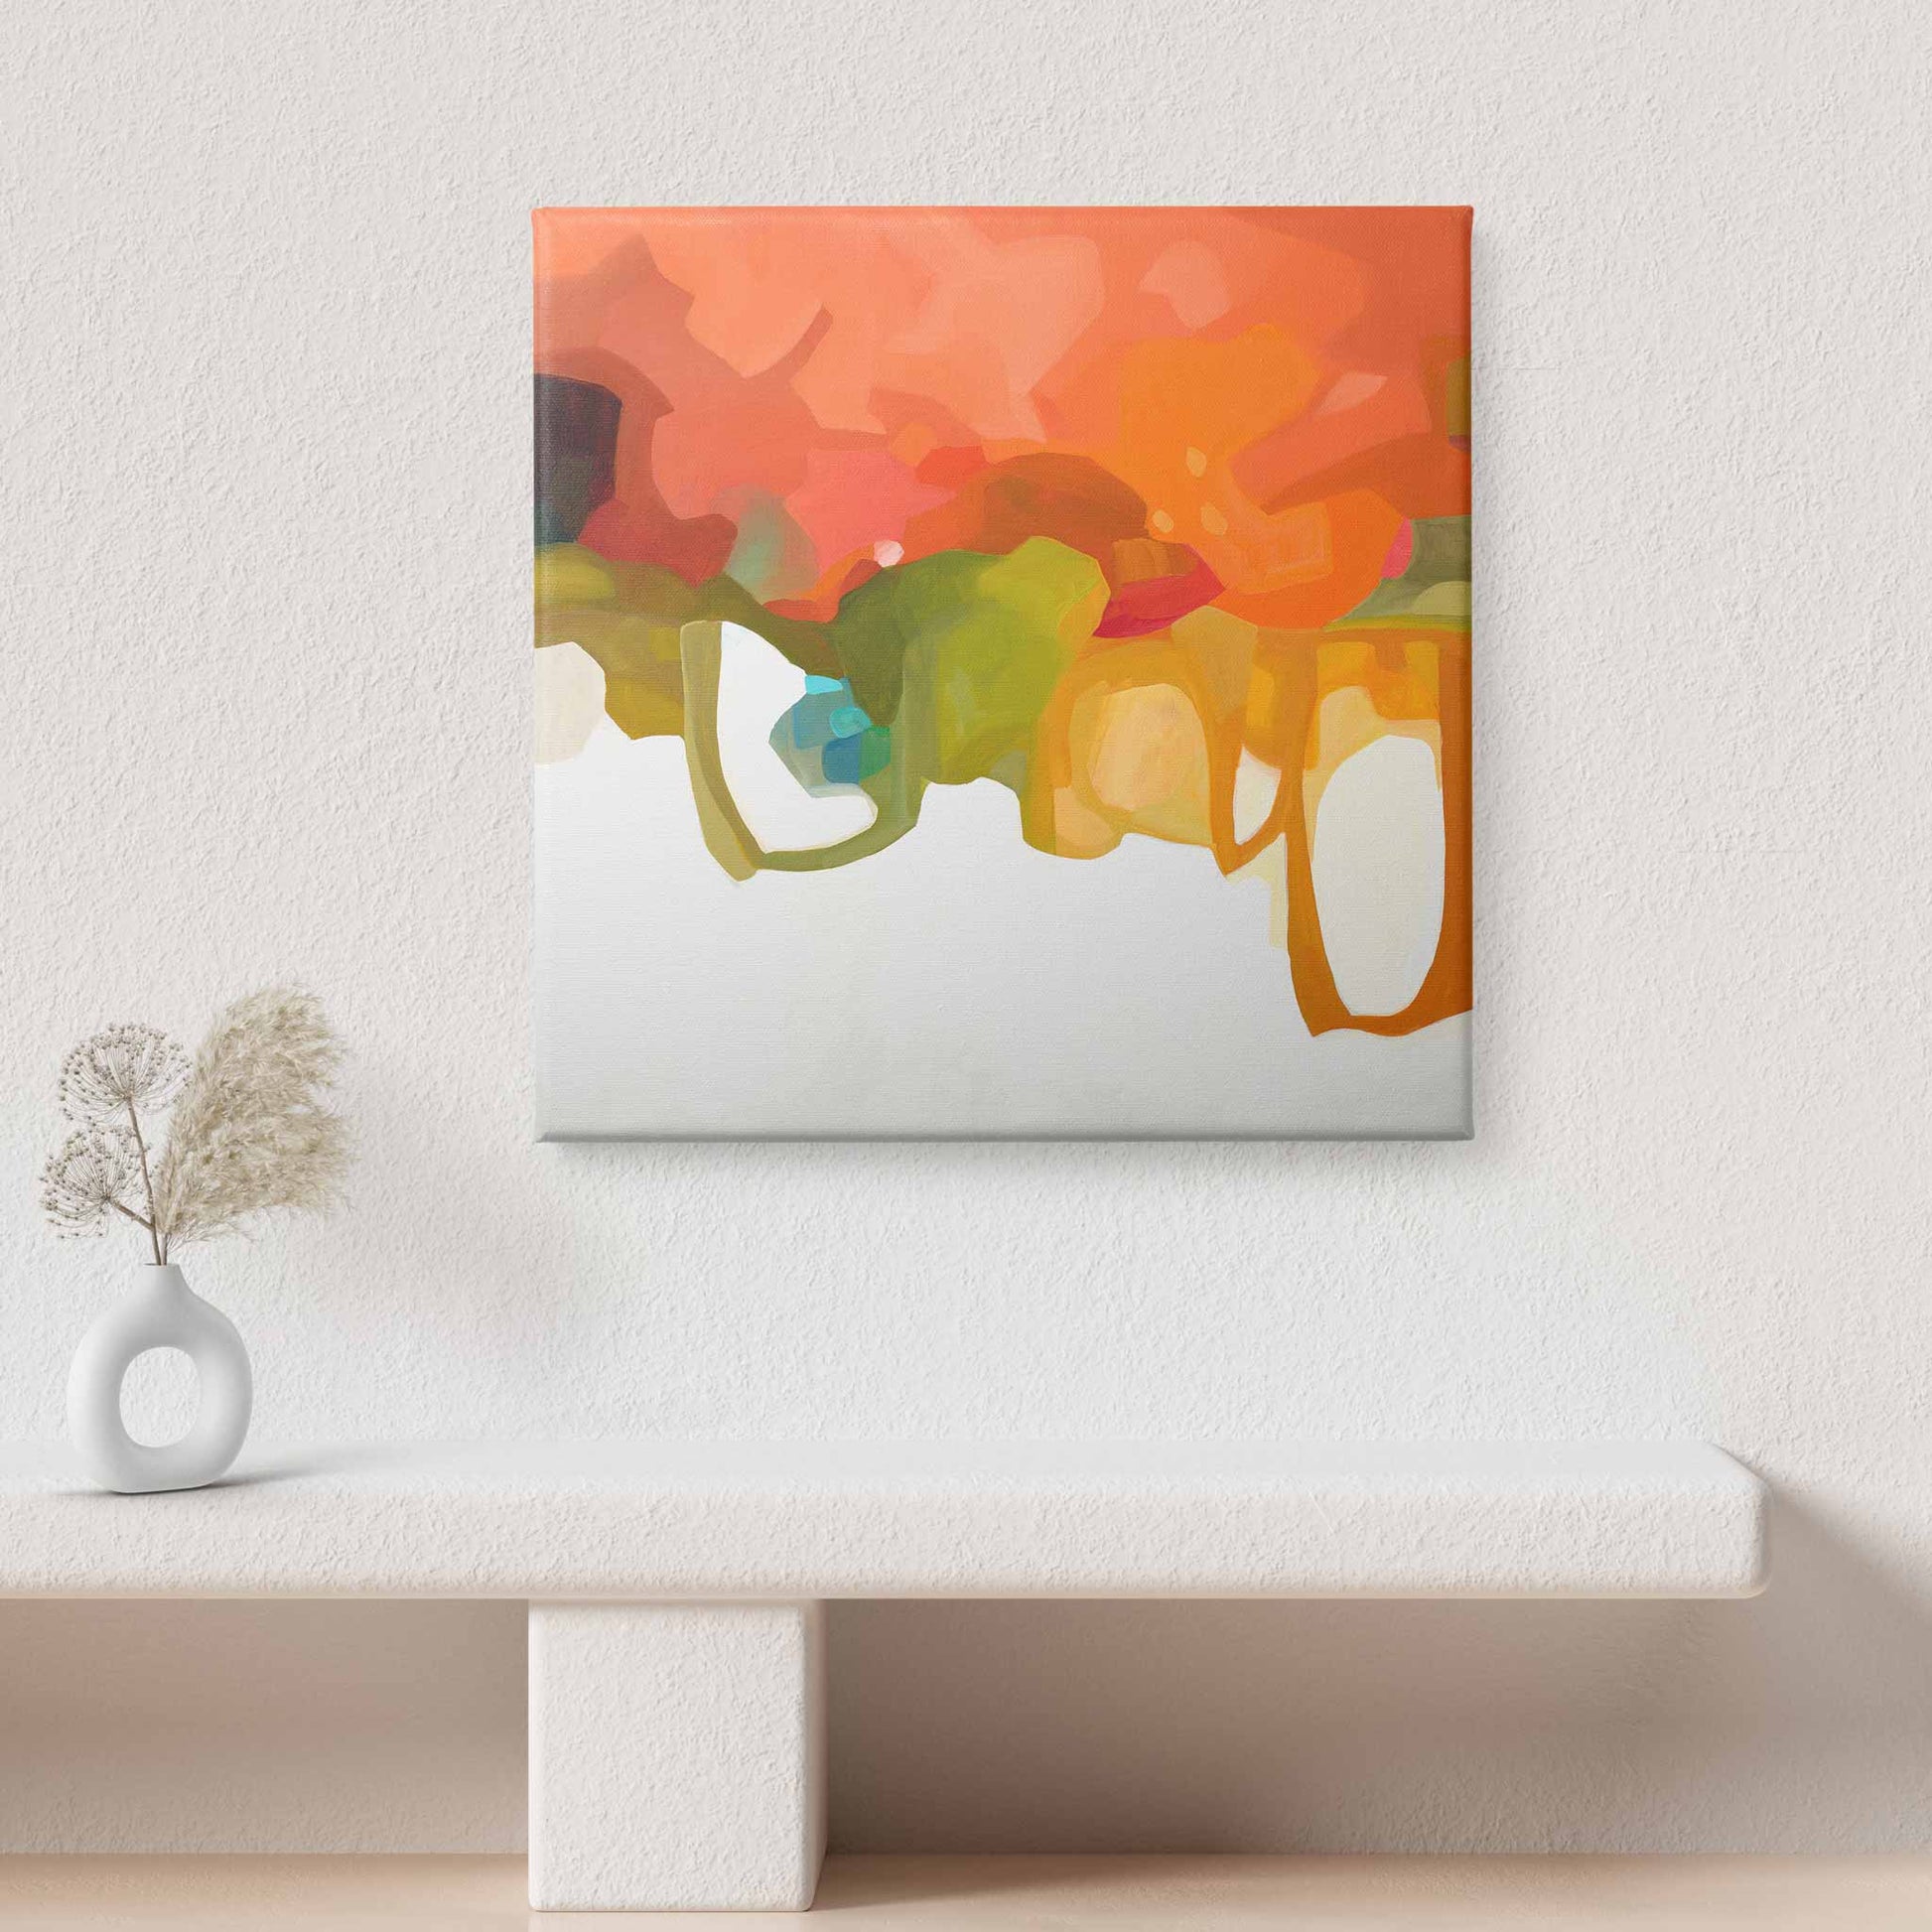 large canvas art print of a citrus orange abstract painting by Canadian artist Susannah Bleasby